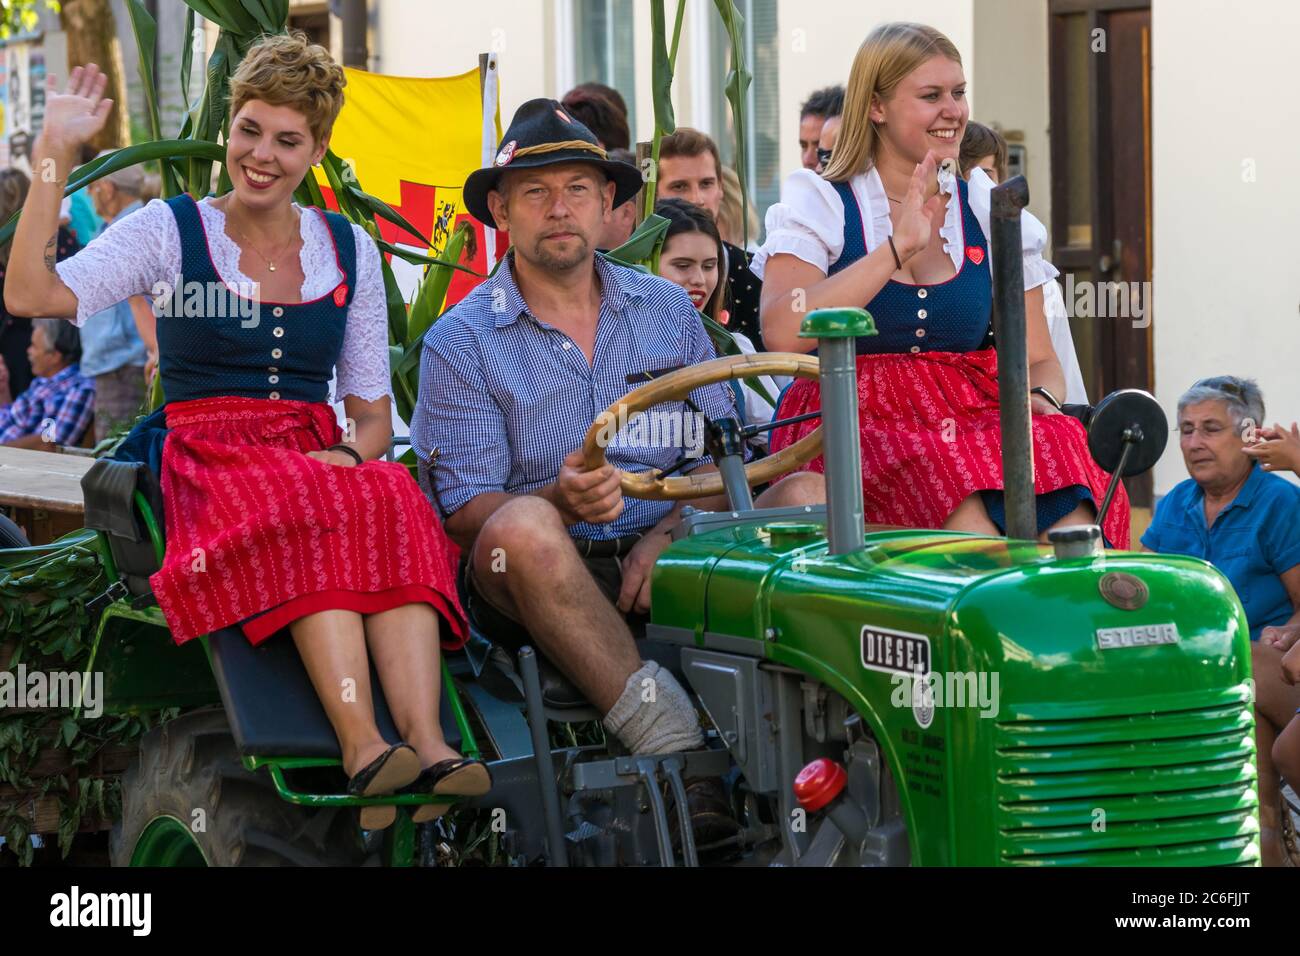 Villach, Austria - August 3th, 2019: Participants riding a tractor at the Villacher Kirchtag, the largest traditional festival in Austria Stock Photo